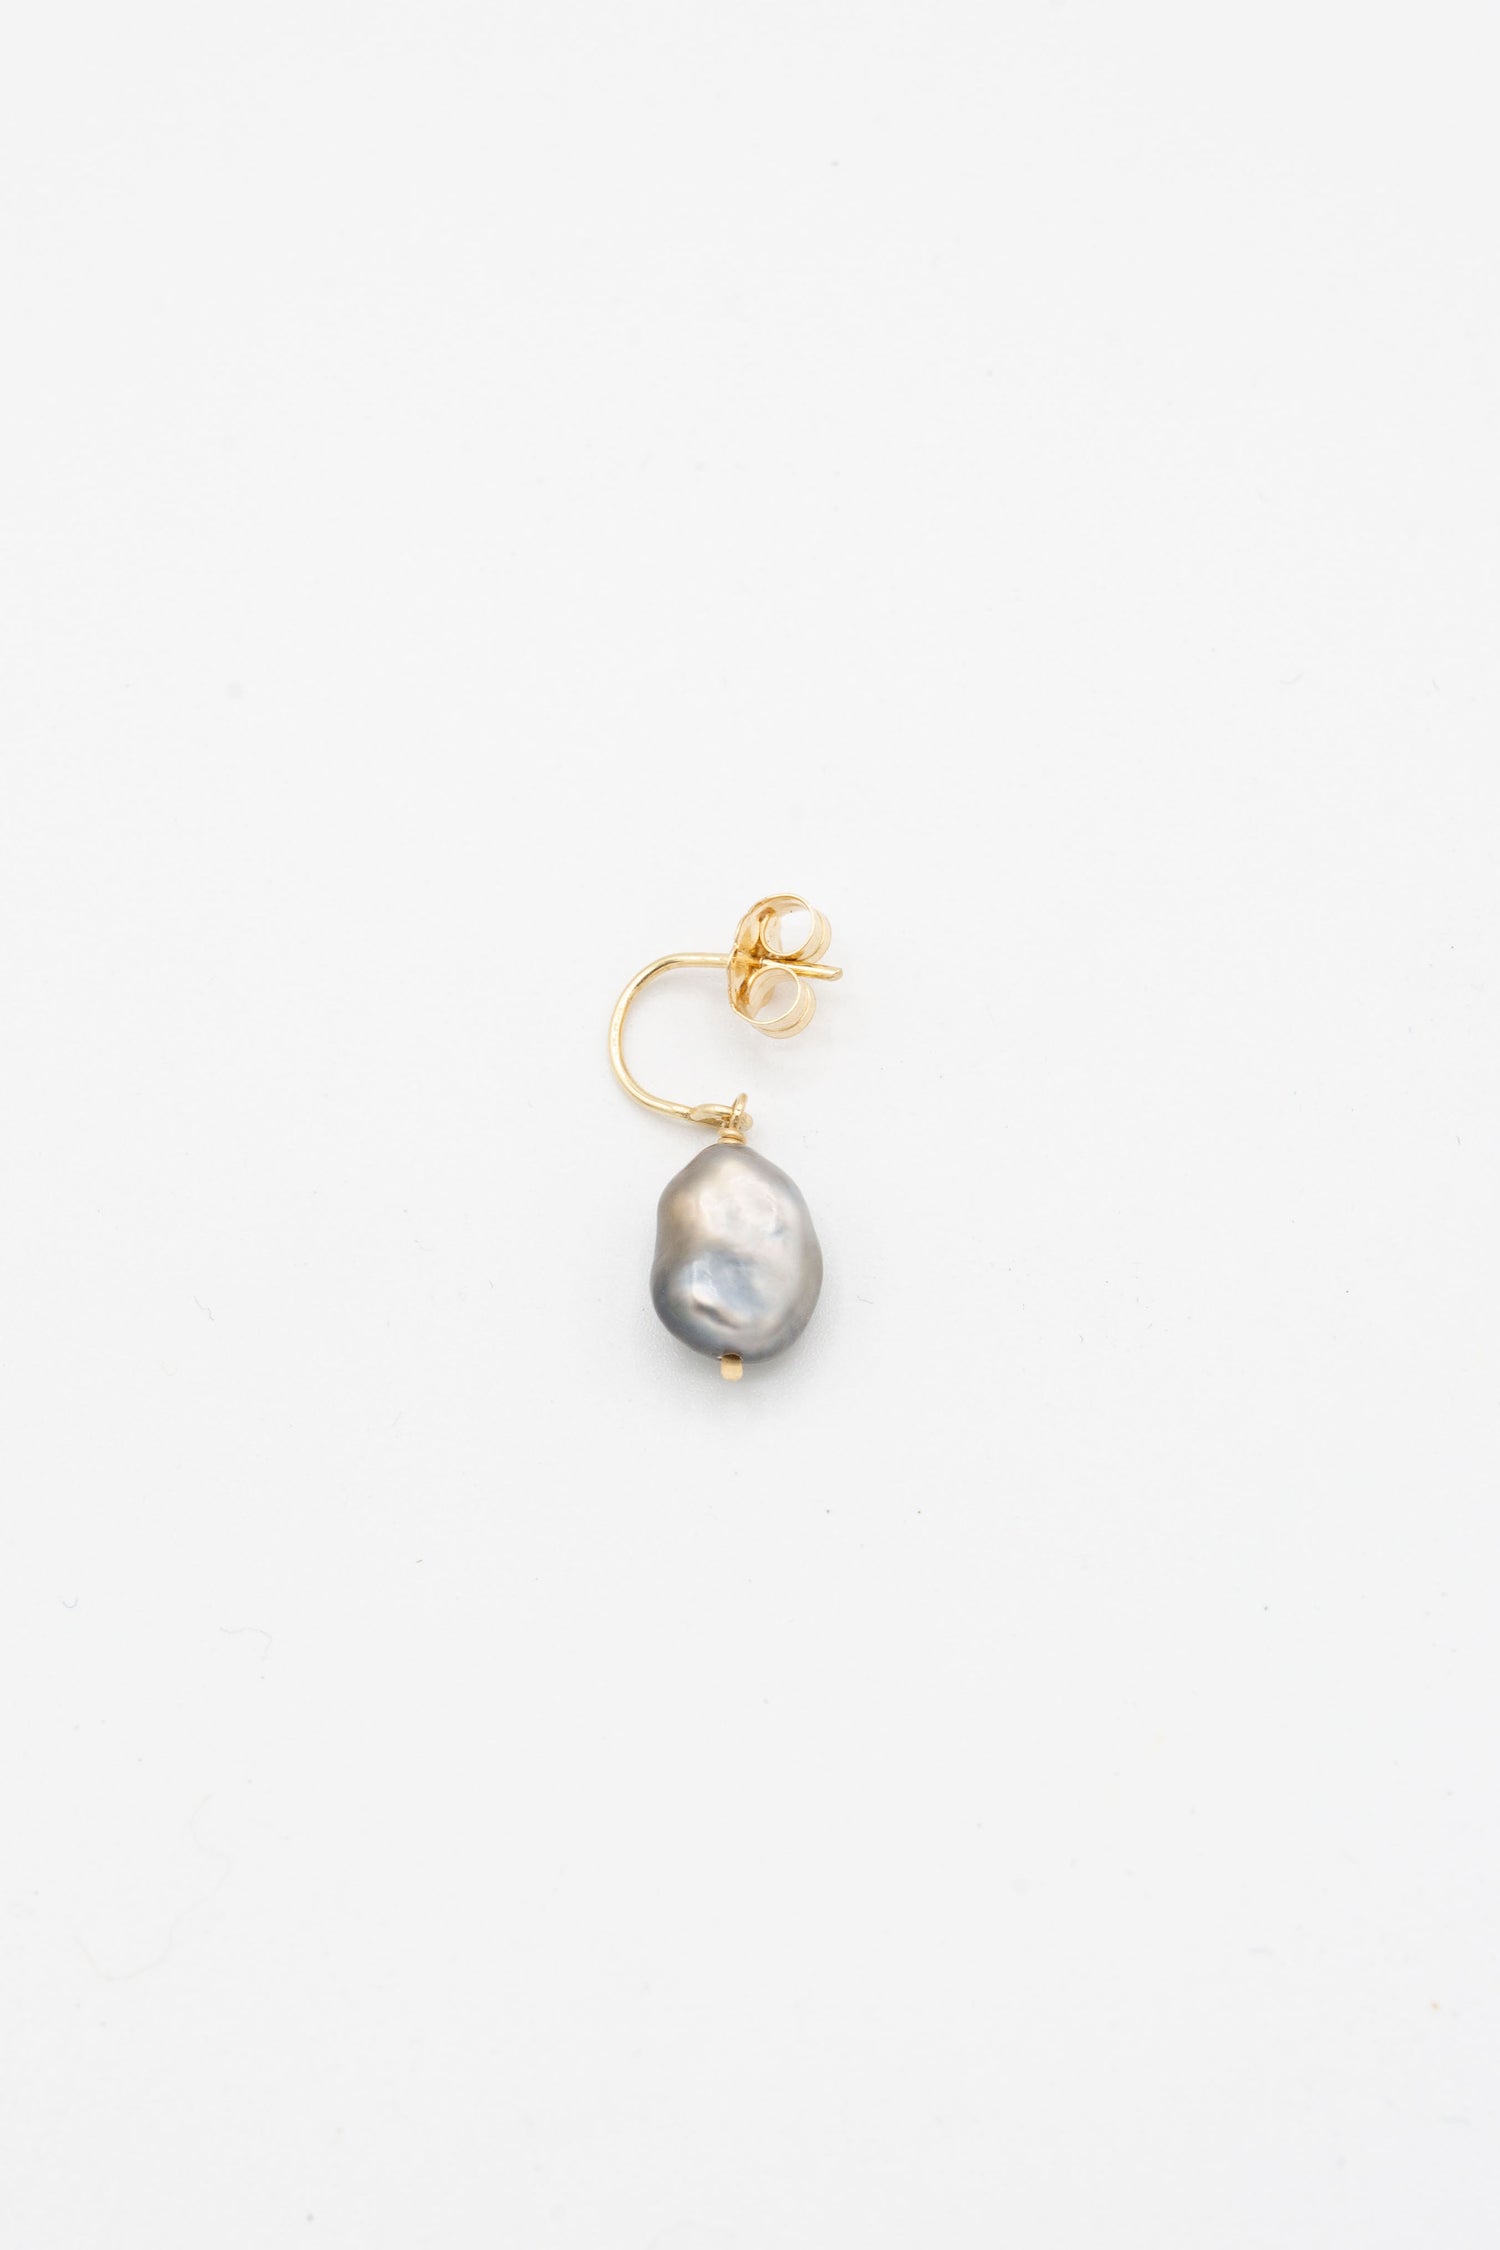 A 14K Crescent Charm Earring in Grey Keshi Pearl by Mary MacGill against a white background.